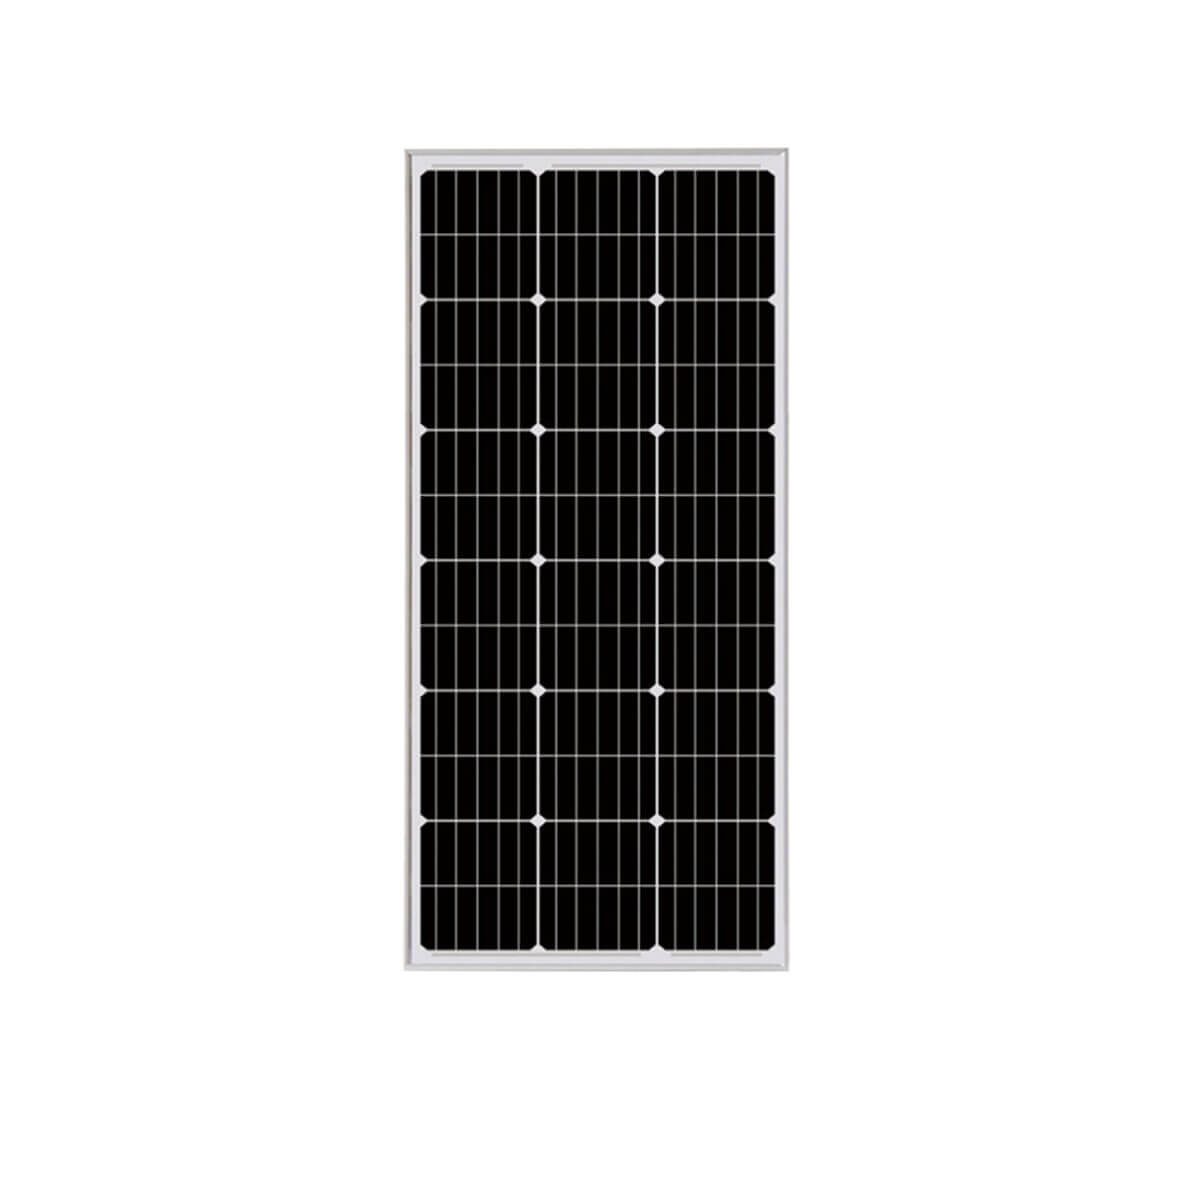 500W Off Grid Solar Power System-complete electrical system kit-home energy system